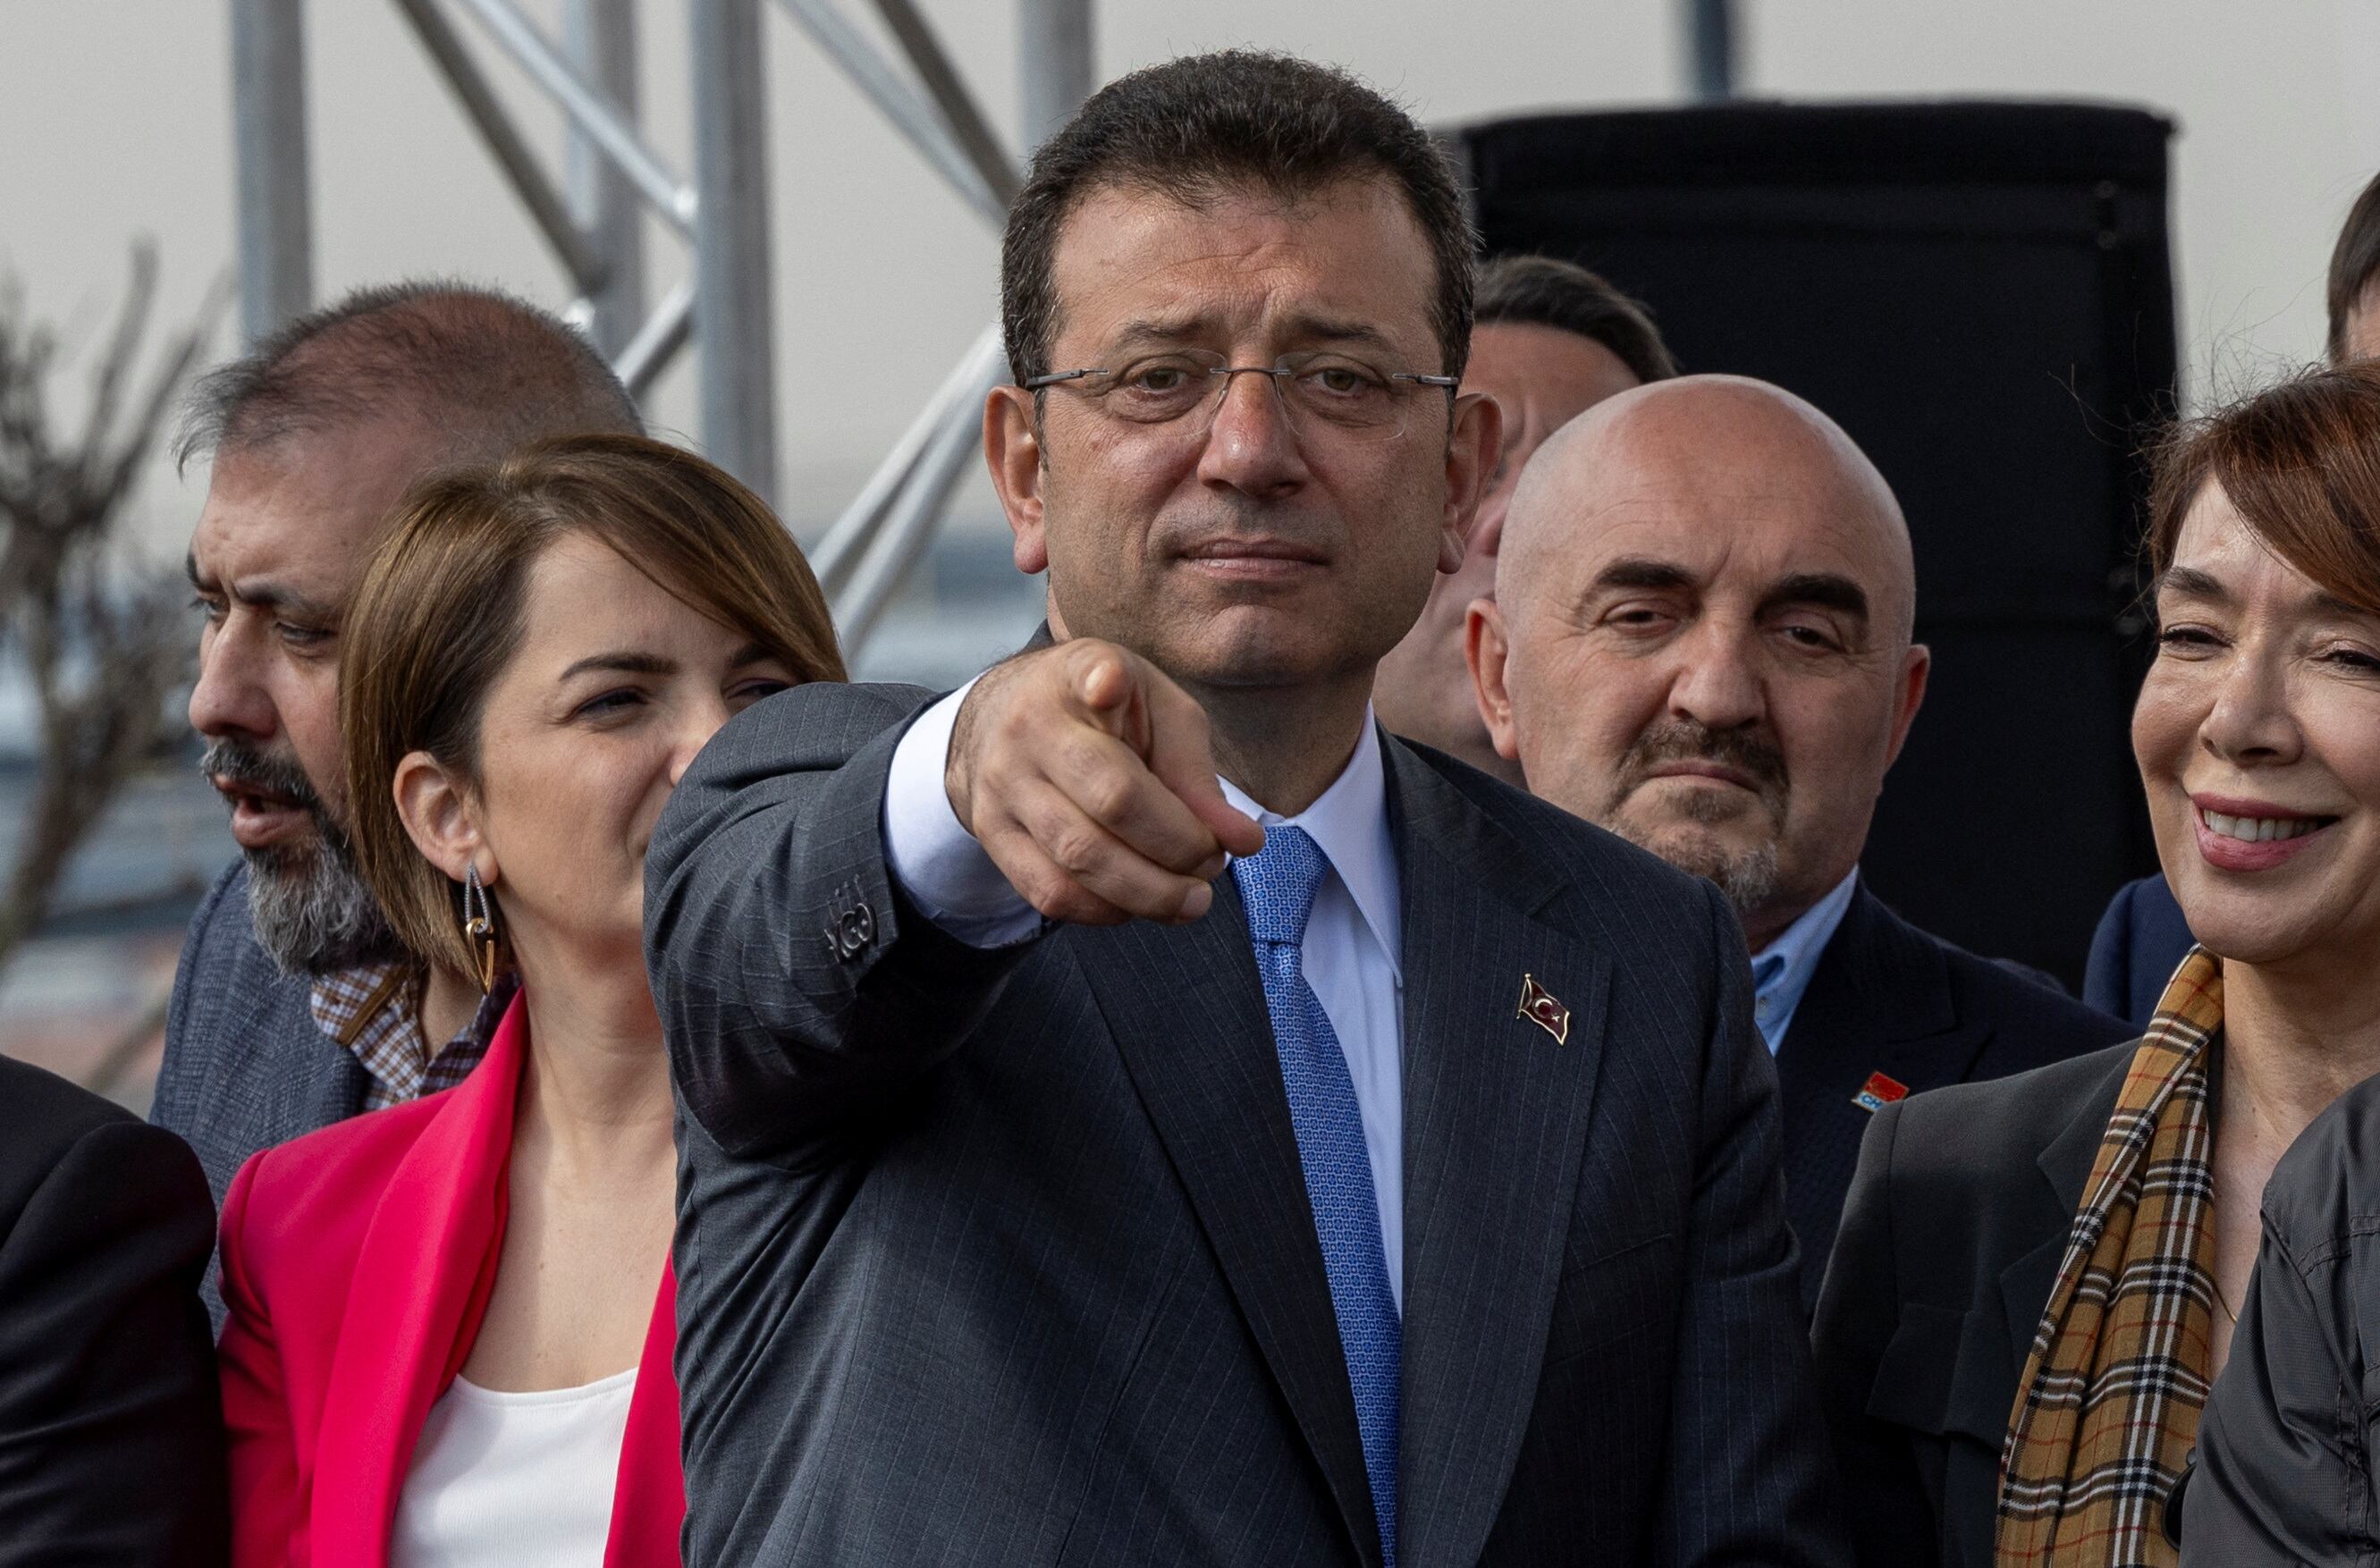 Erdogan critic Imamoglu faces fierce fight for re-election as Istanbul mayor